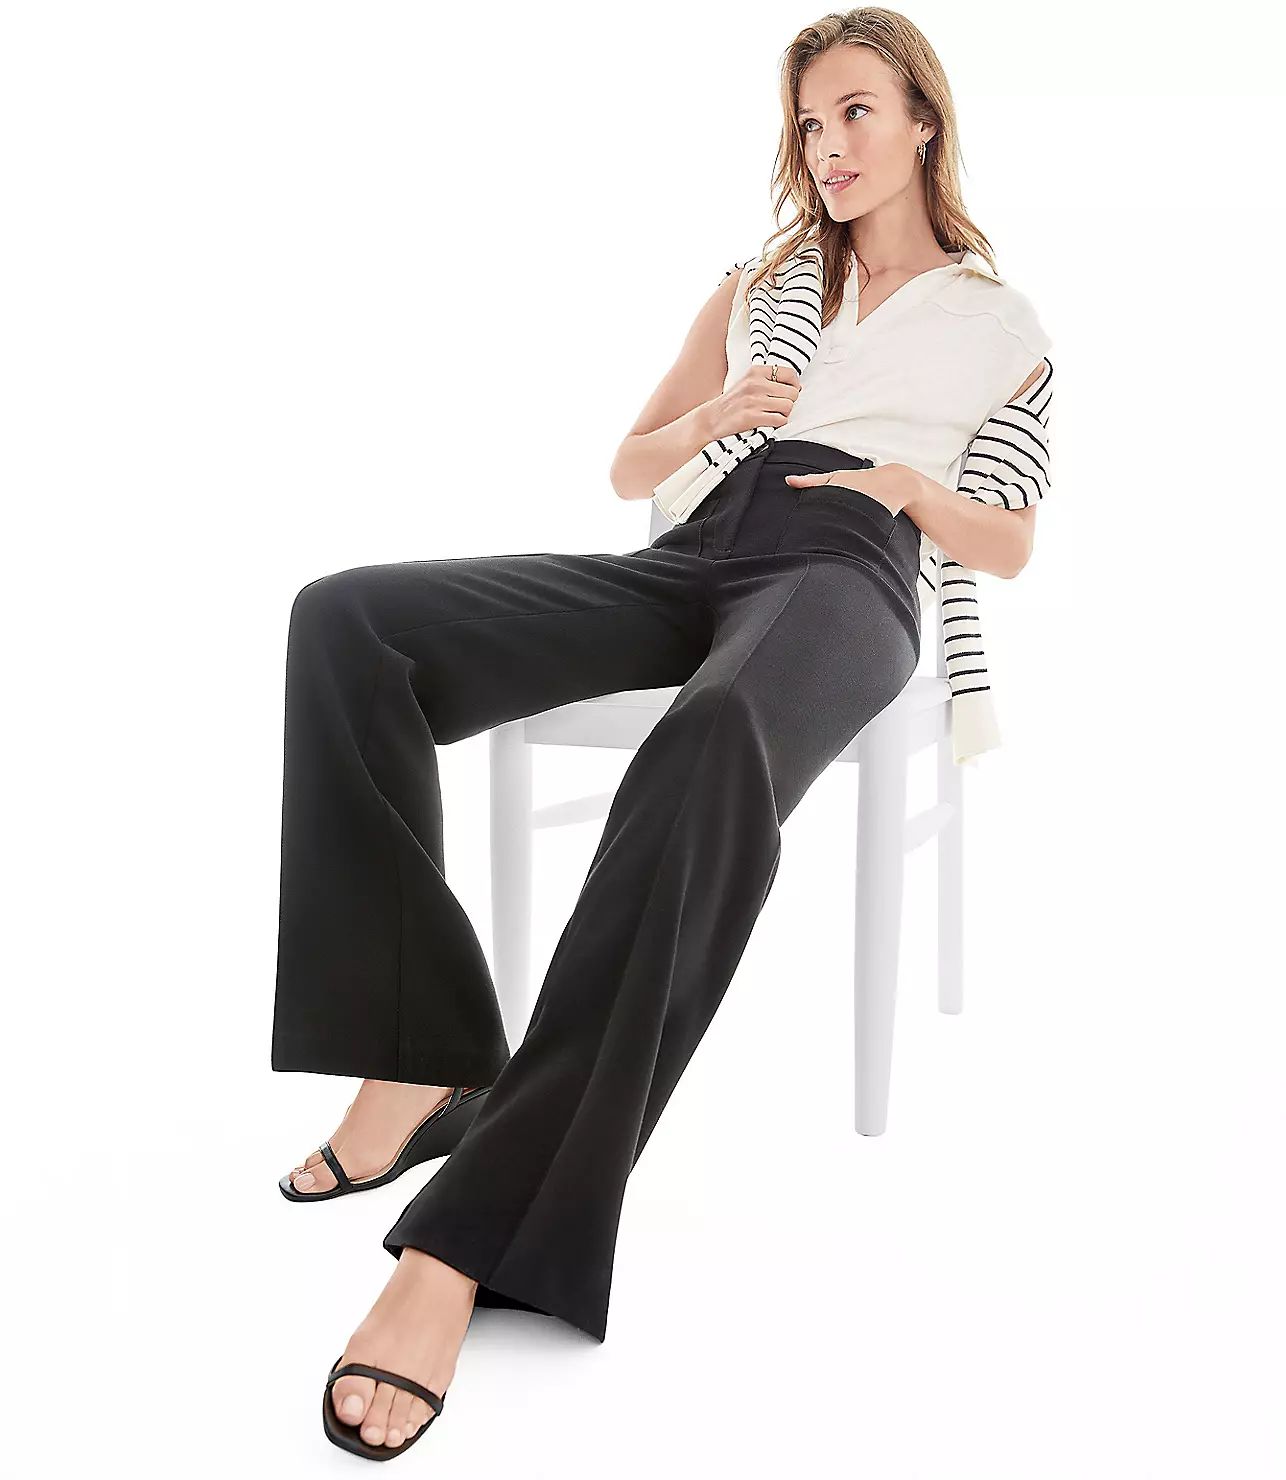 Pintucked Patch Pocket Flare Pants in Doubleface | LOFT